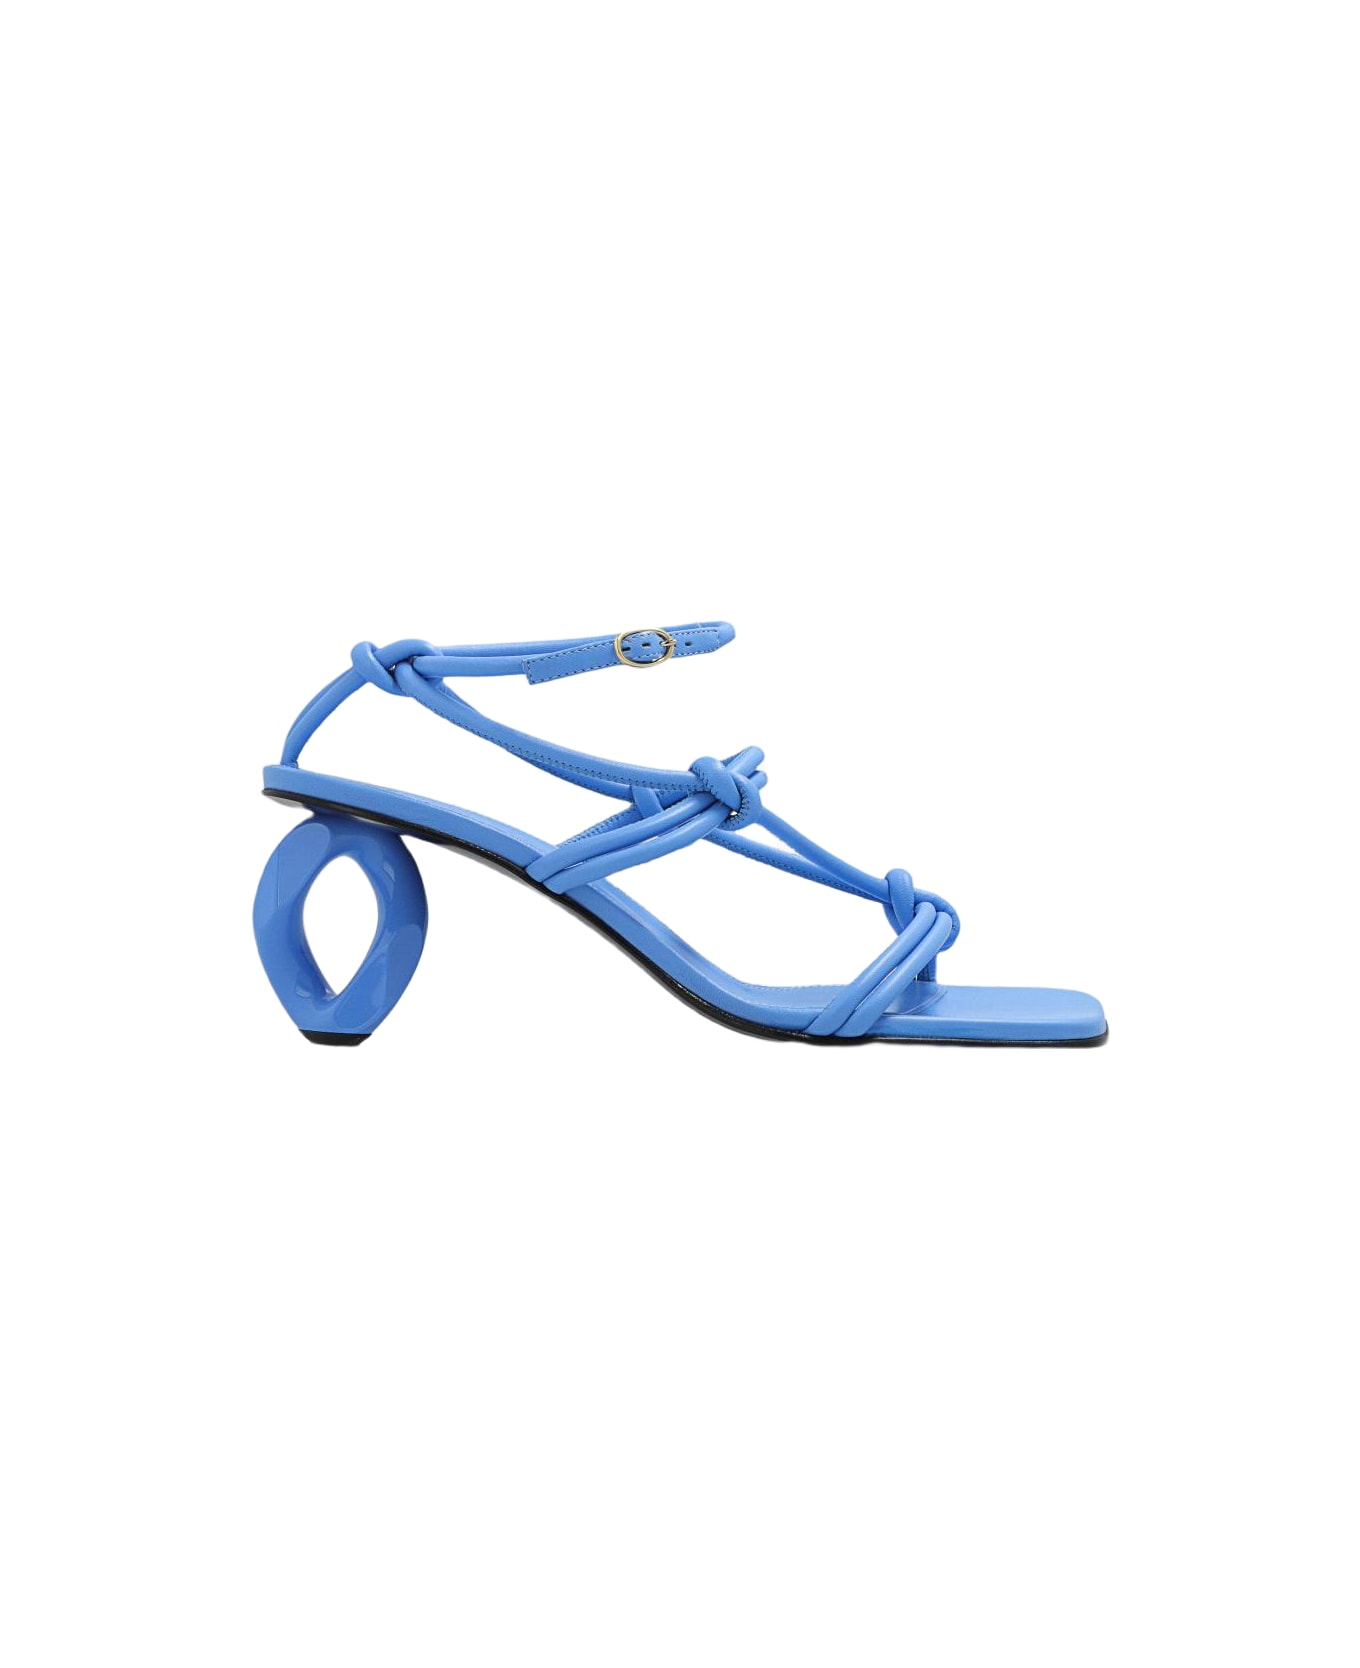 J.W. Anderson 'catena' Heeled Sandals - Blue